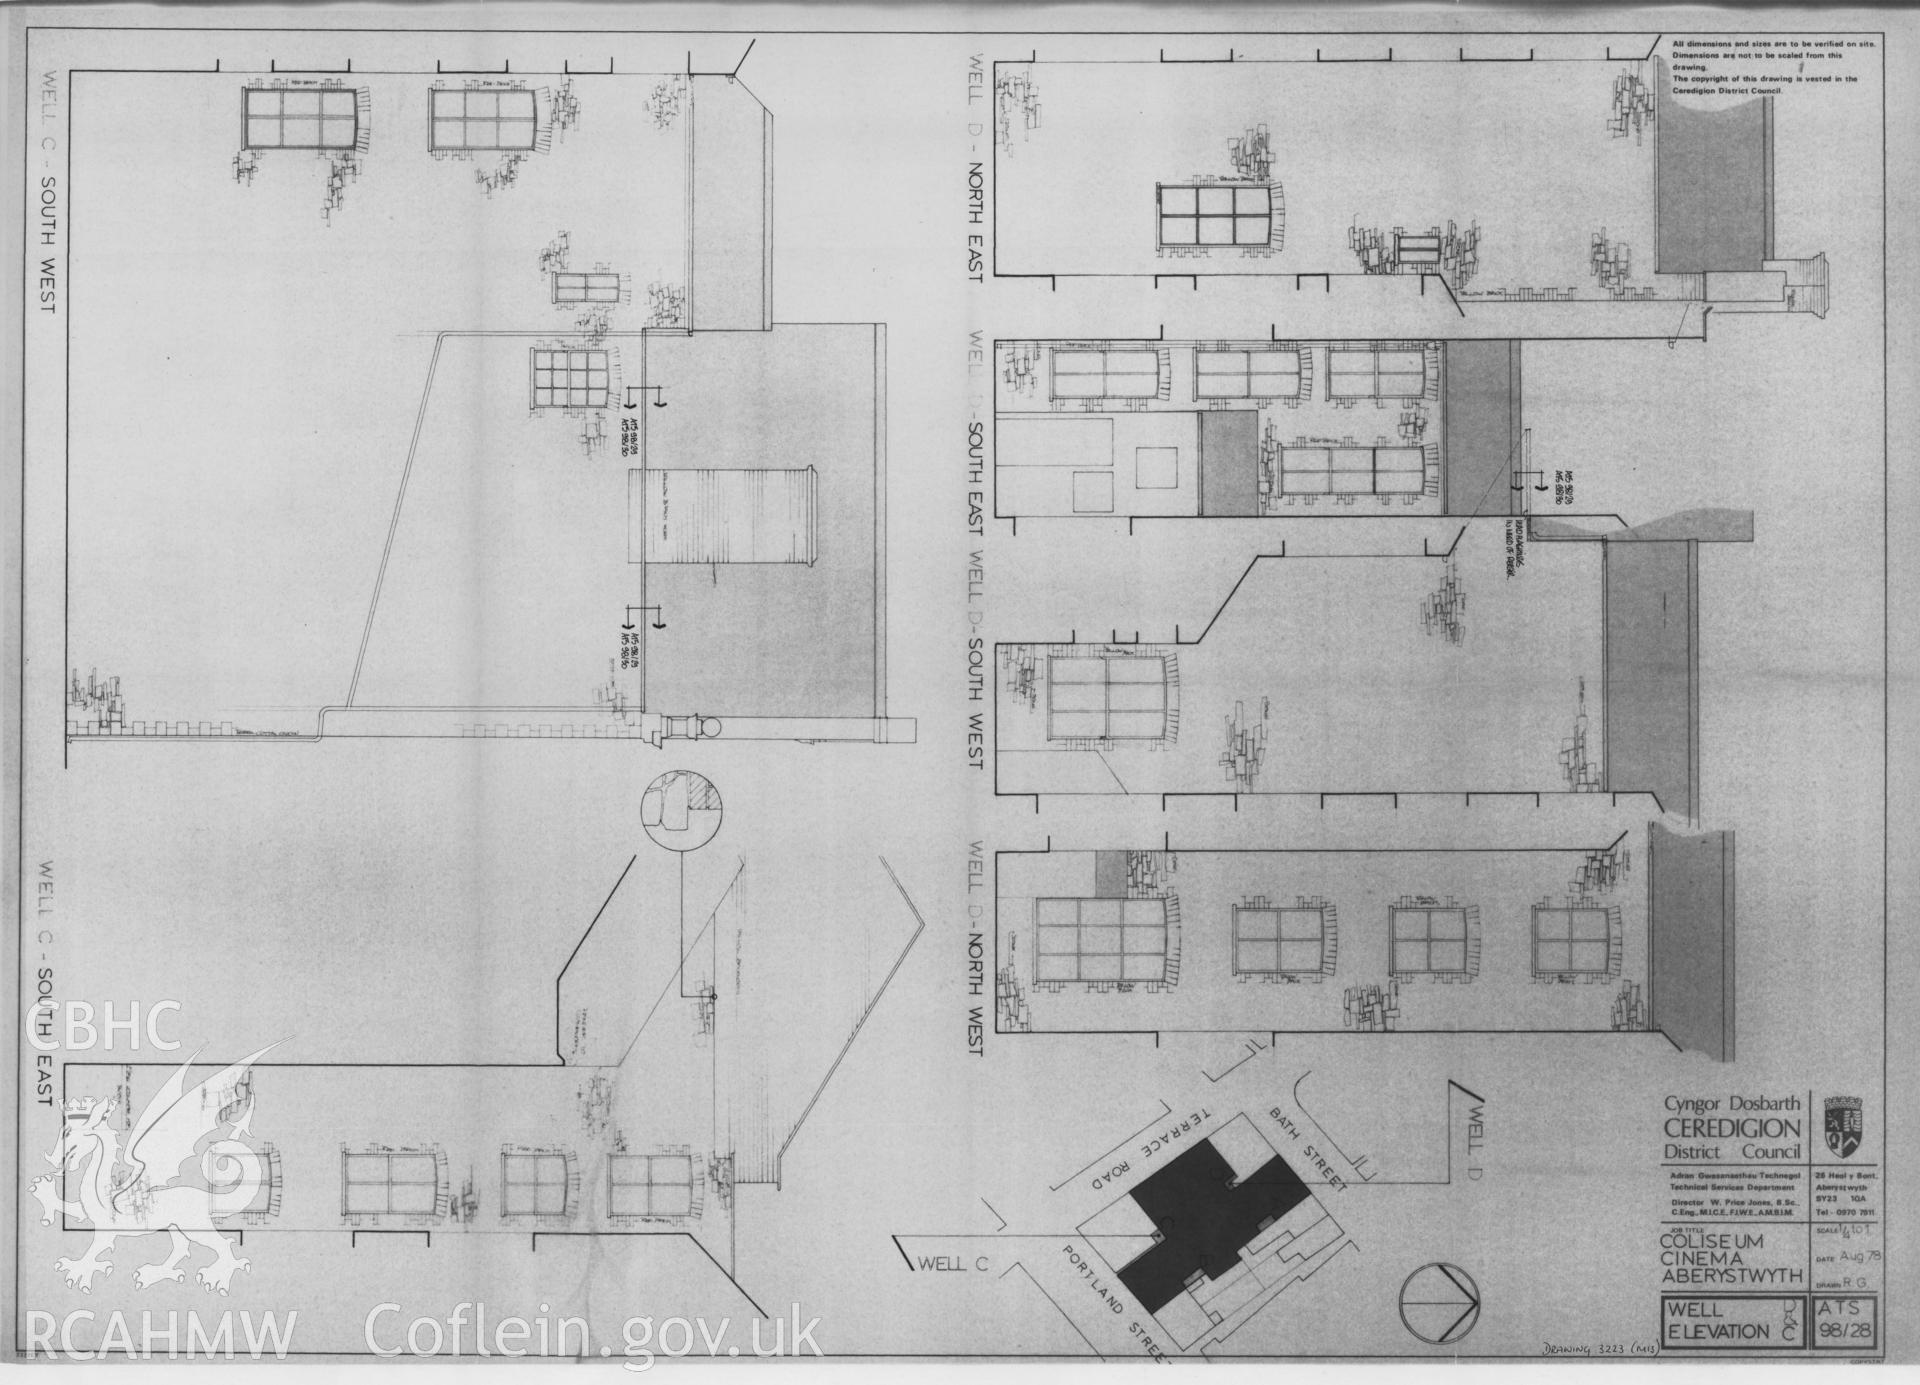 Copy of a non RCAHMW drawing showing elevation of Coliseum Cinema, Aberystwyth, received in the course of threatened buildings case ref no M/DES/B/CD/79/01